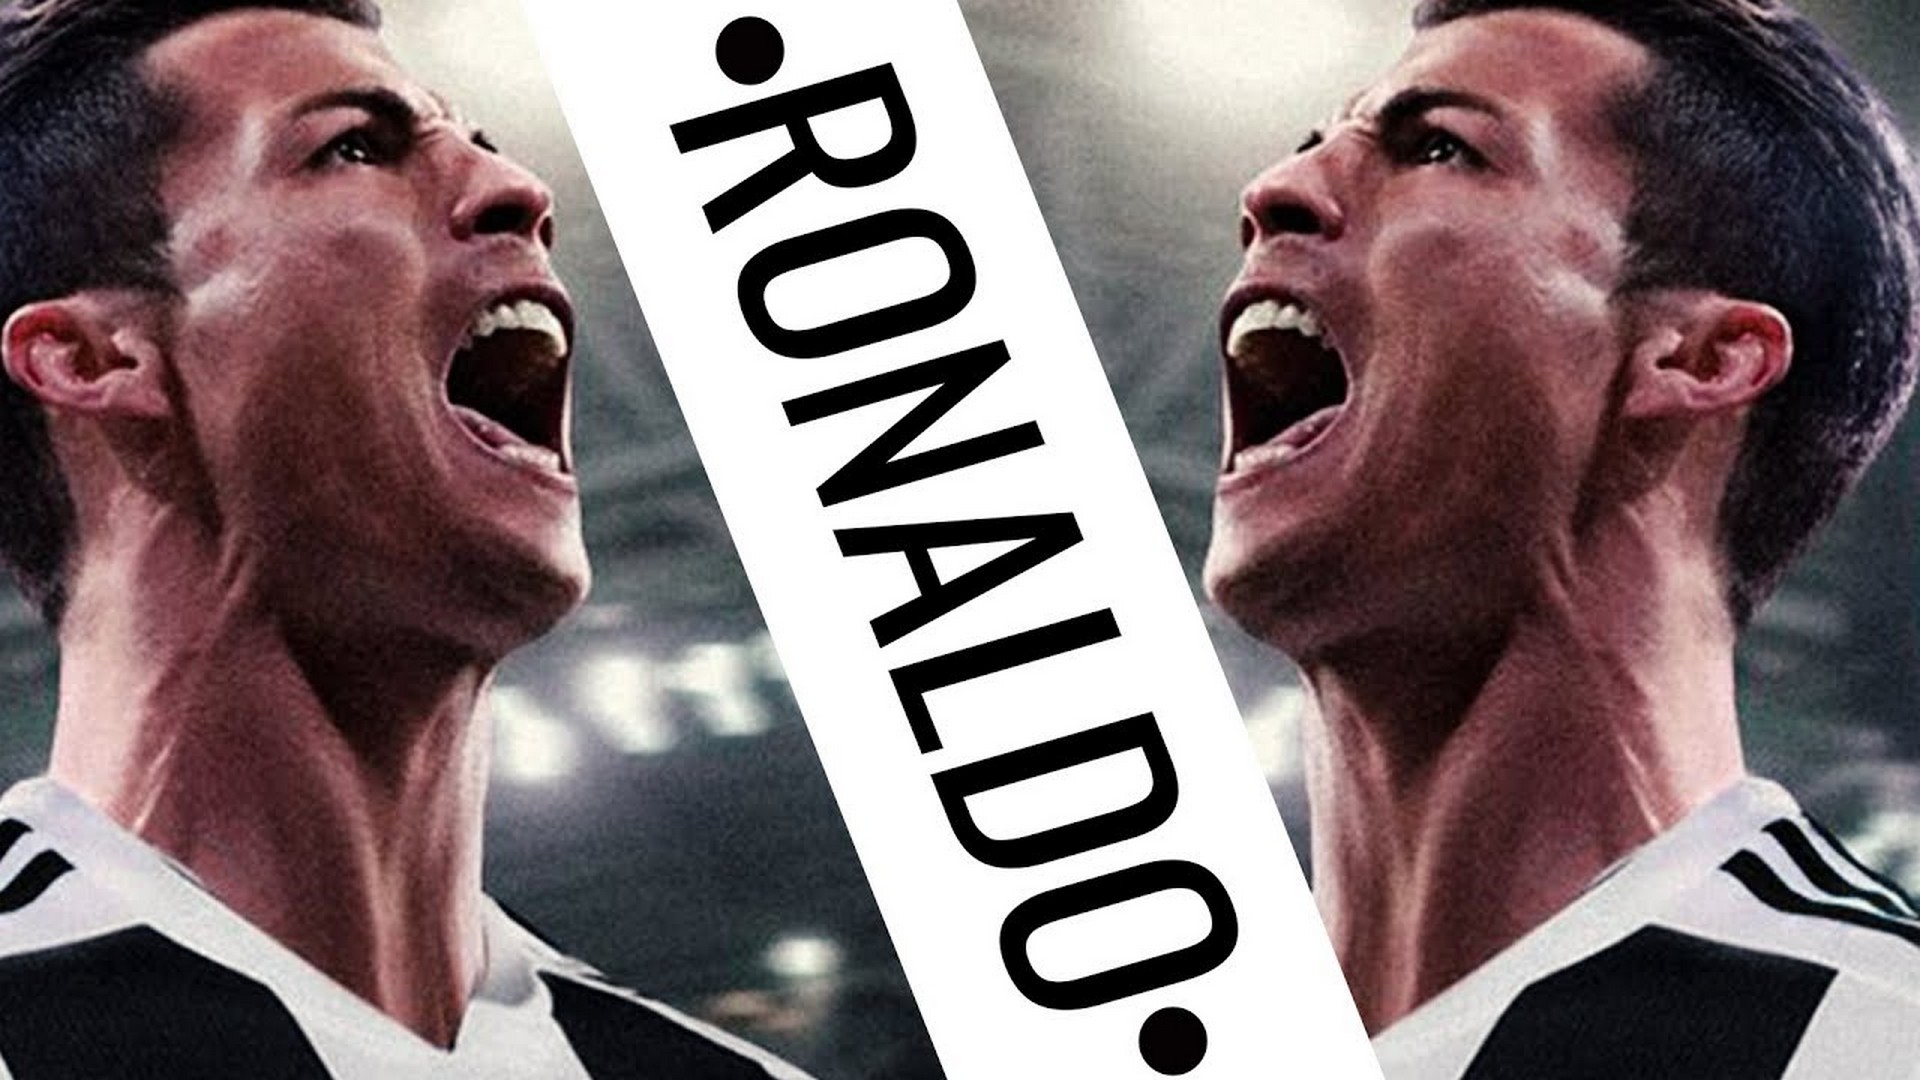 Wallpaper CR7 Juventus HD with image resolution 1920x1080 pixel. You can make this wallpaper for your Desktop Computer Backgrounds, Mac Wallpapers, Android Lock screen or iPhone Screensavers